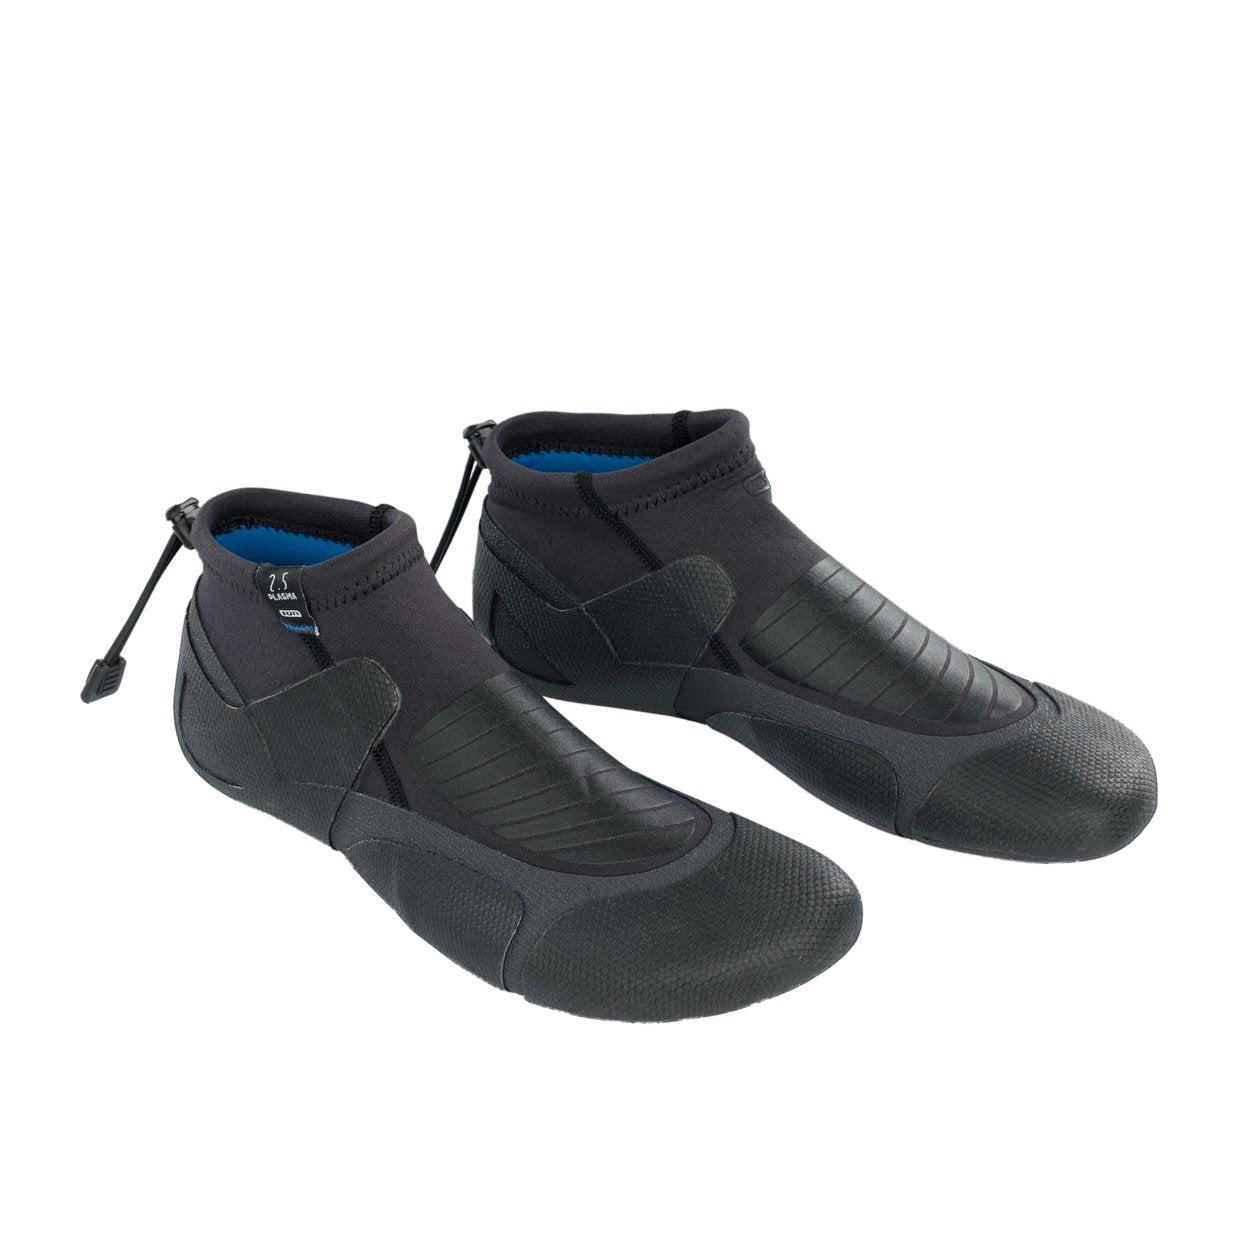 ION Plasma Shoes 2.5 Round Toe 2022 - Worthing Watersports - 9010583059495 - Footwear - ION Water